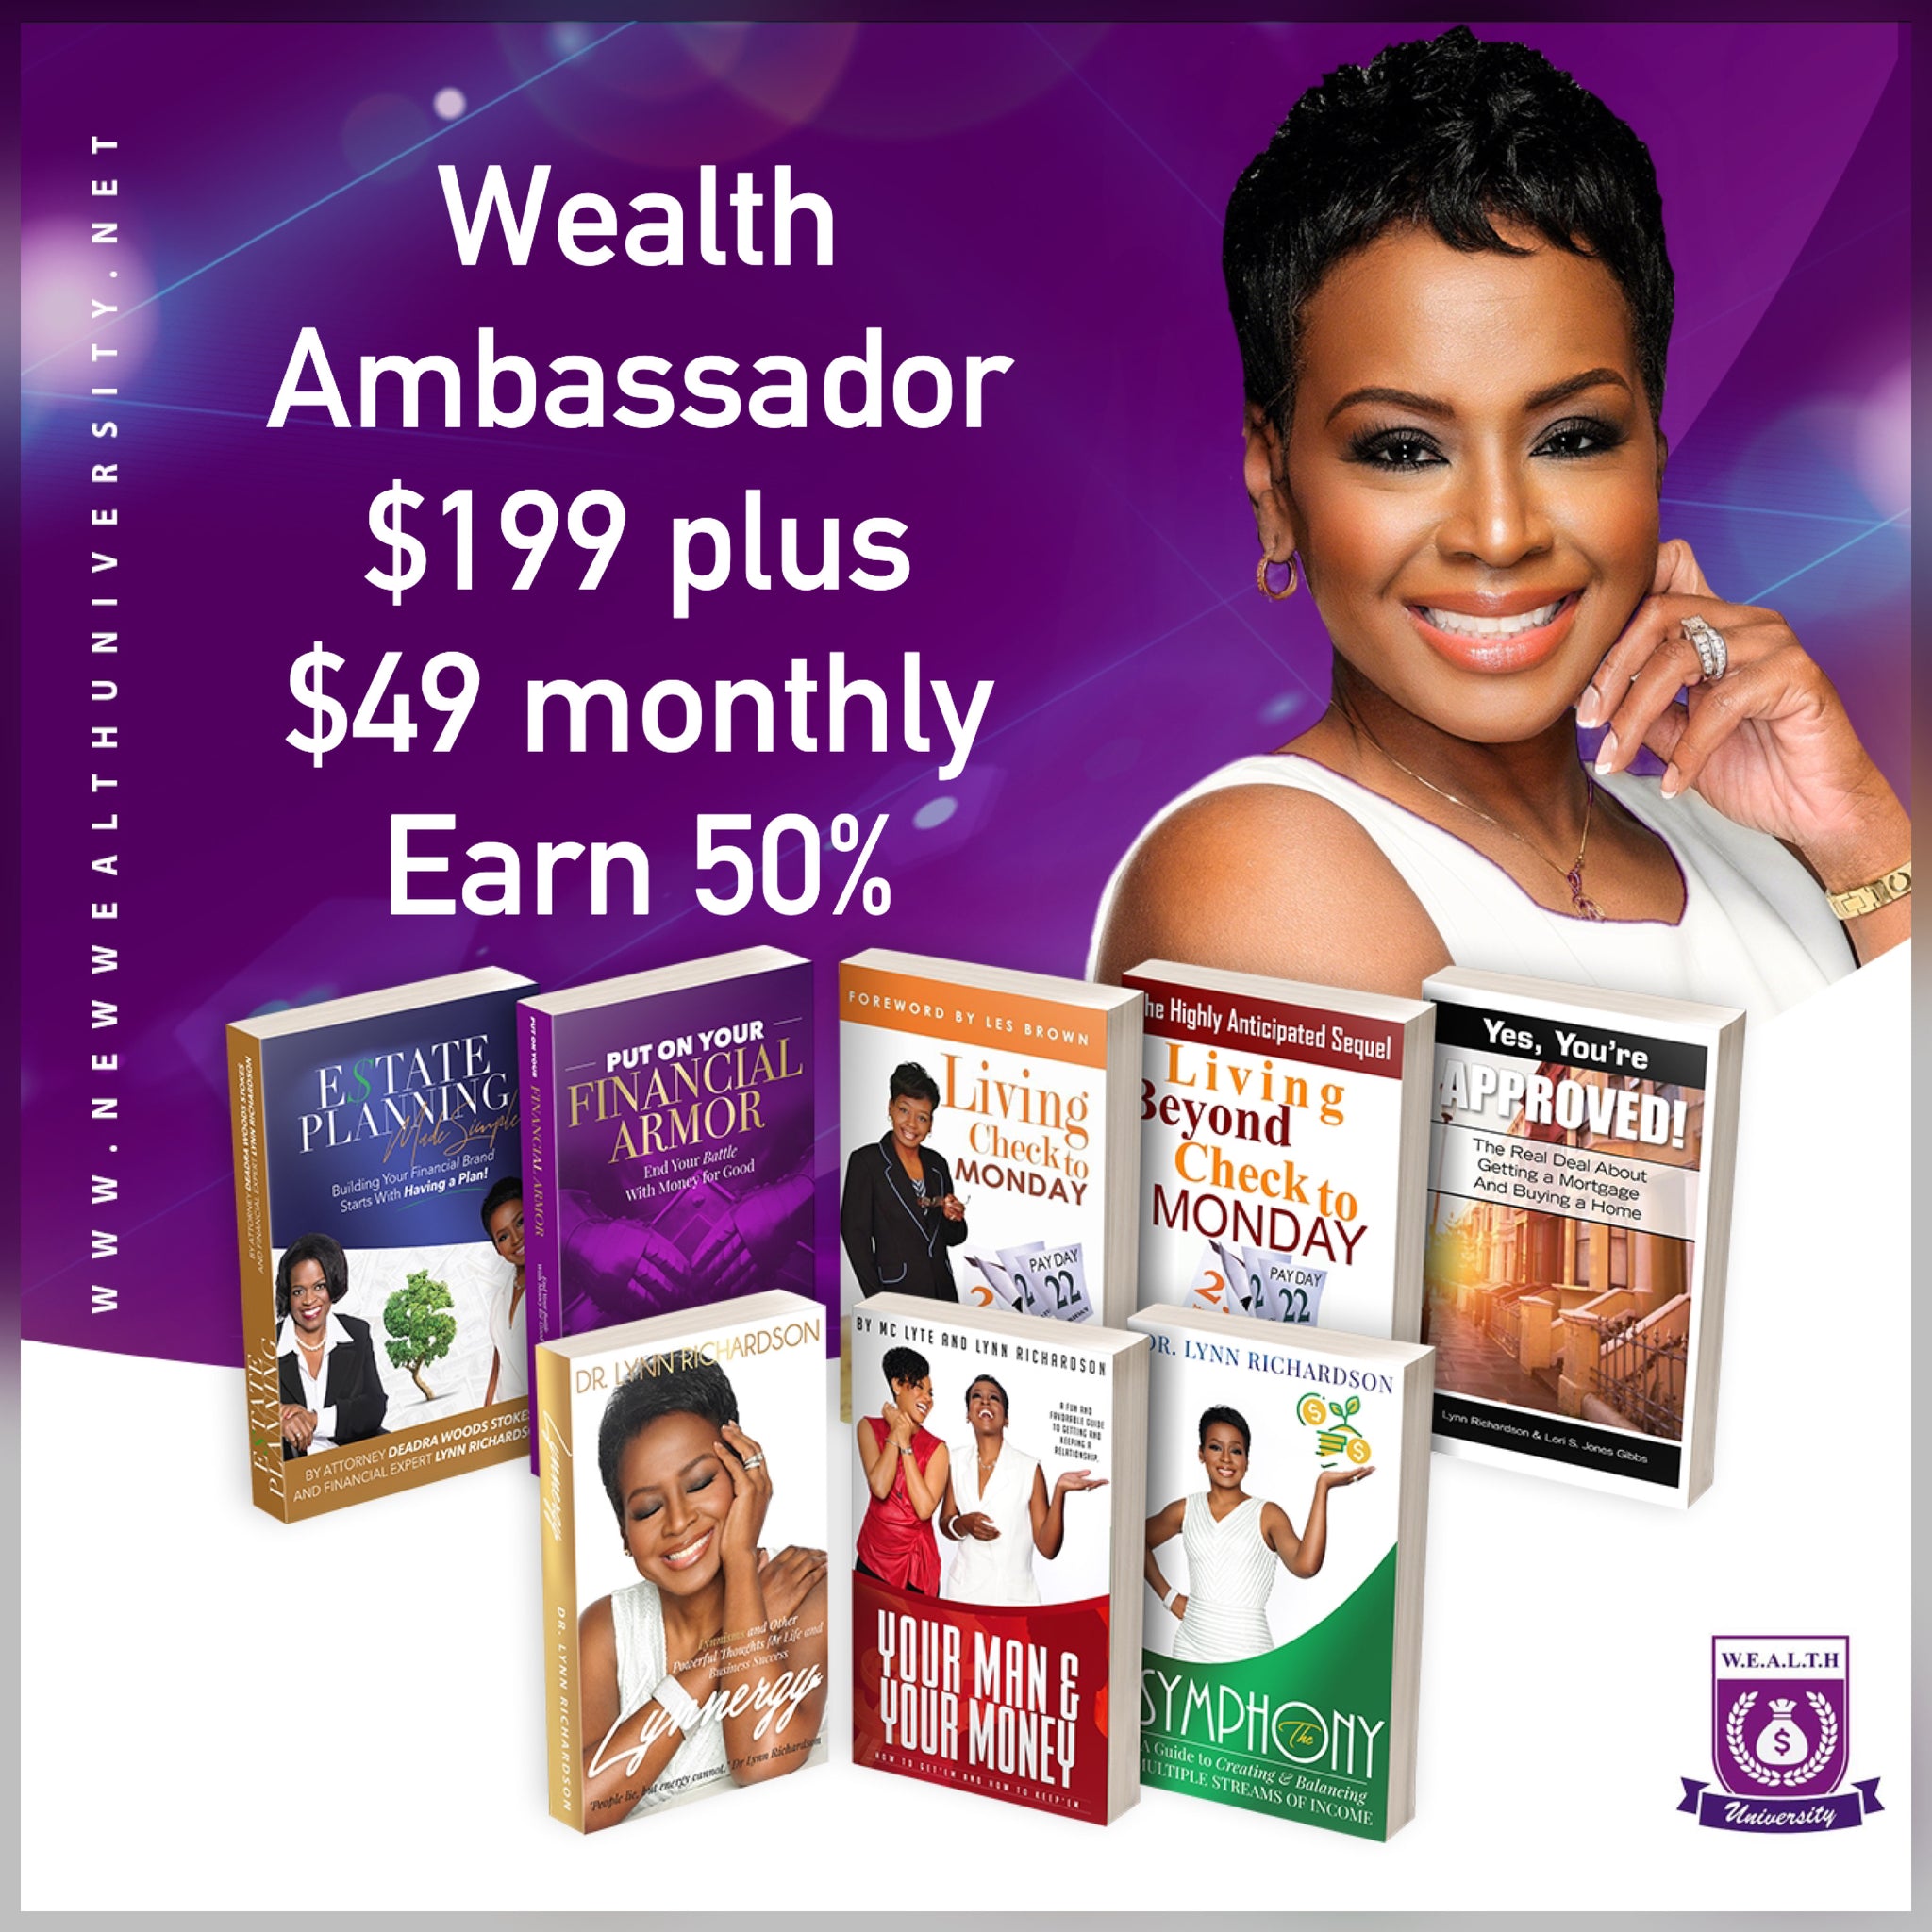 Upgrade from Affiliate to W.E.A.L.T.H. Ambassador